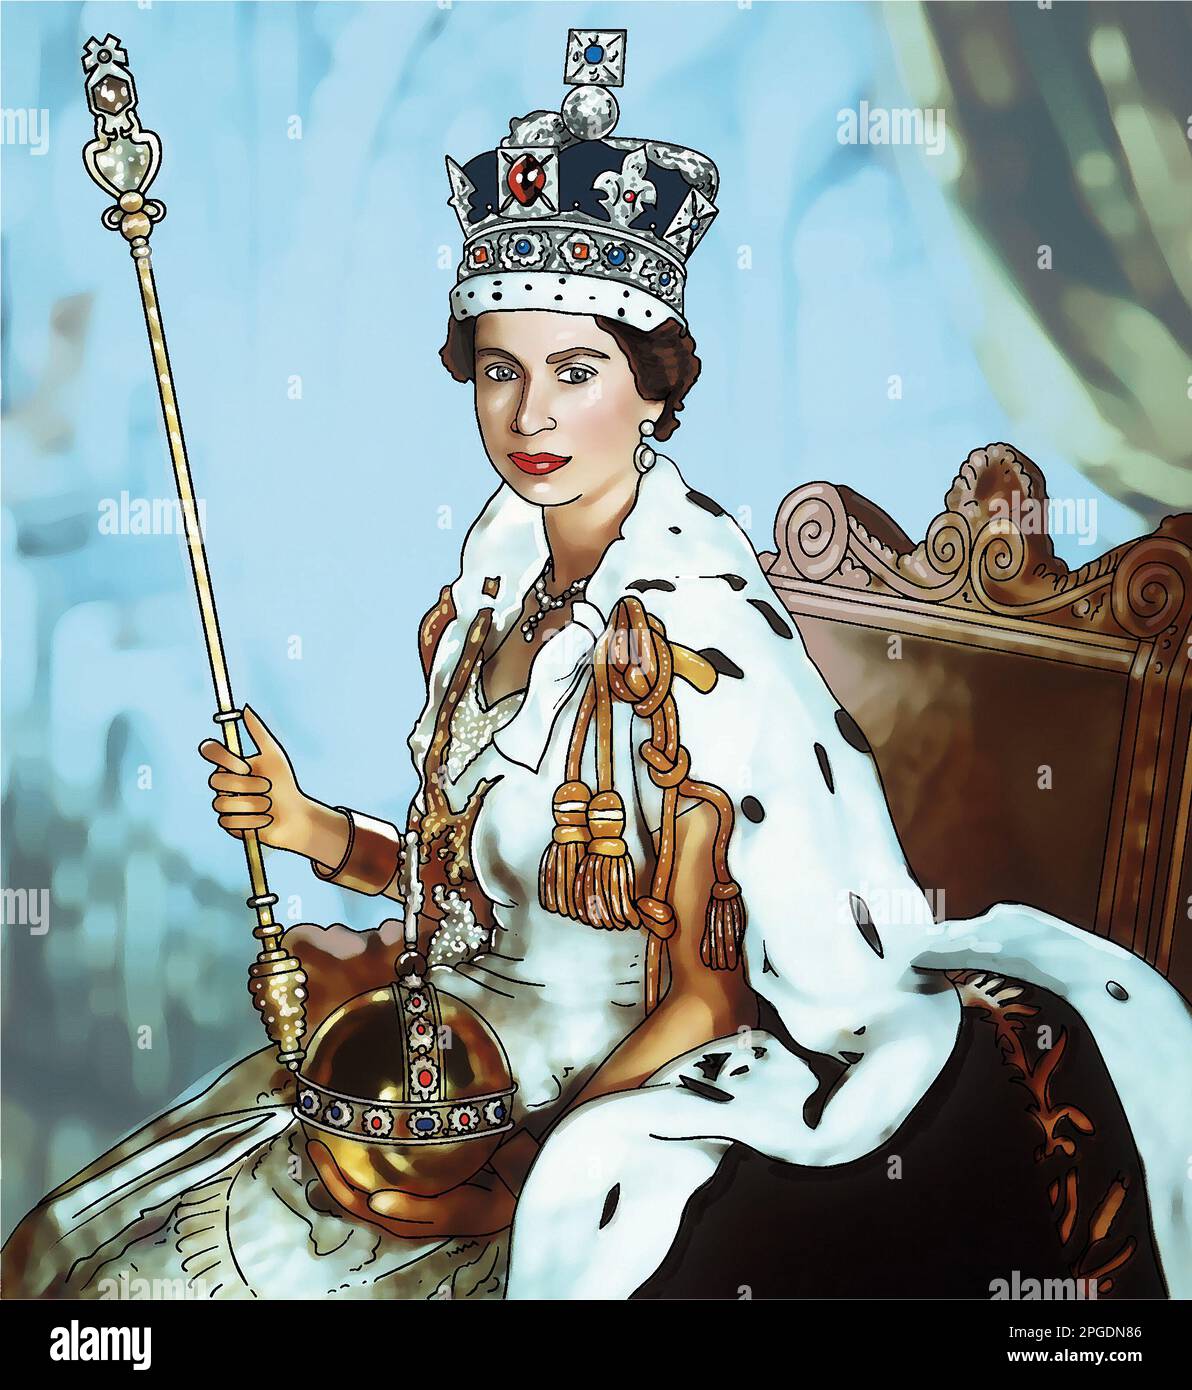 Art illustration of Queen Elizabeth II, Queen of the United Kingdom inspired by the Coronation portrait by Cecil Beaton, Stock Photo